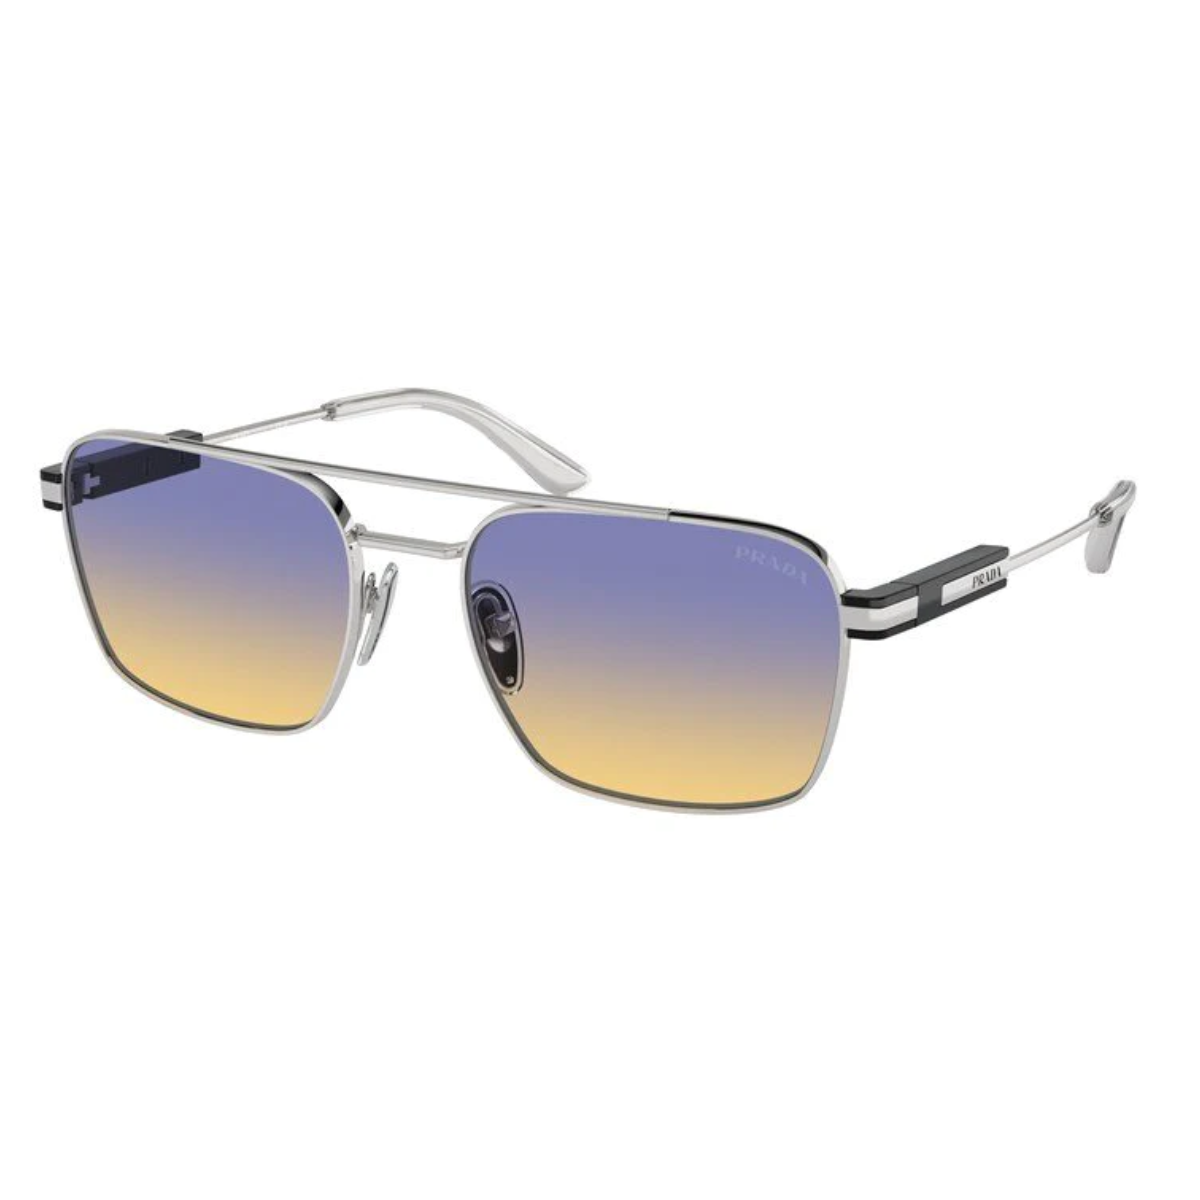 "Discover the versatility of Prada SPR 67ZS 1BCO6Z sunglasses for men at Optorium. With aviator, triangle, and cooling glass options available, these premium Prada shades are a must-have for any fashion-forward individual."